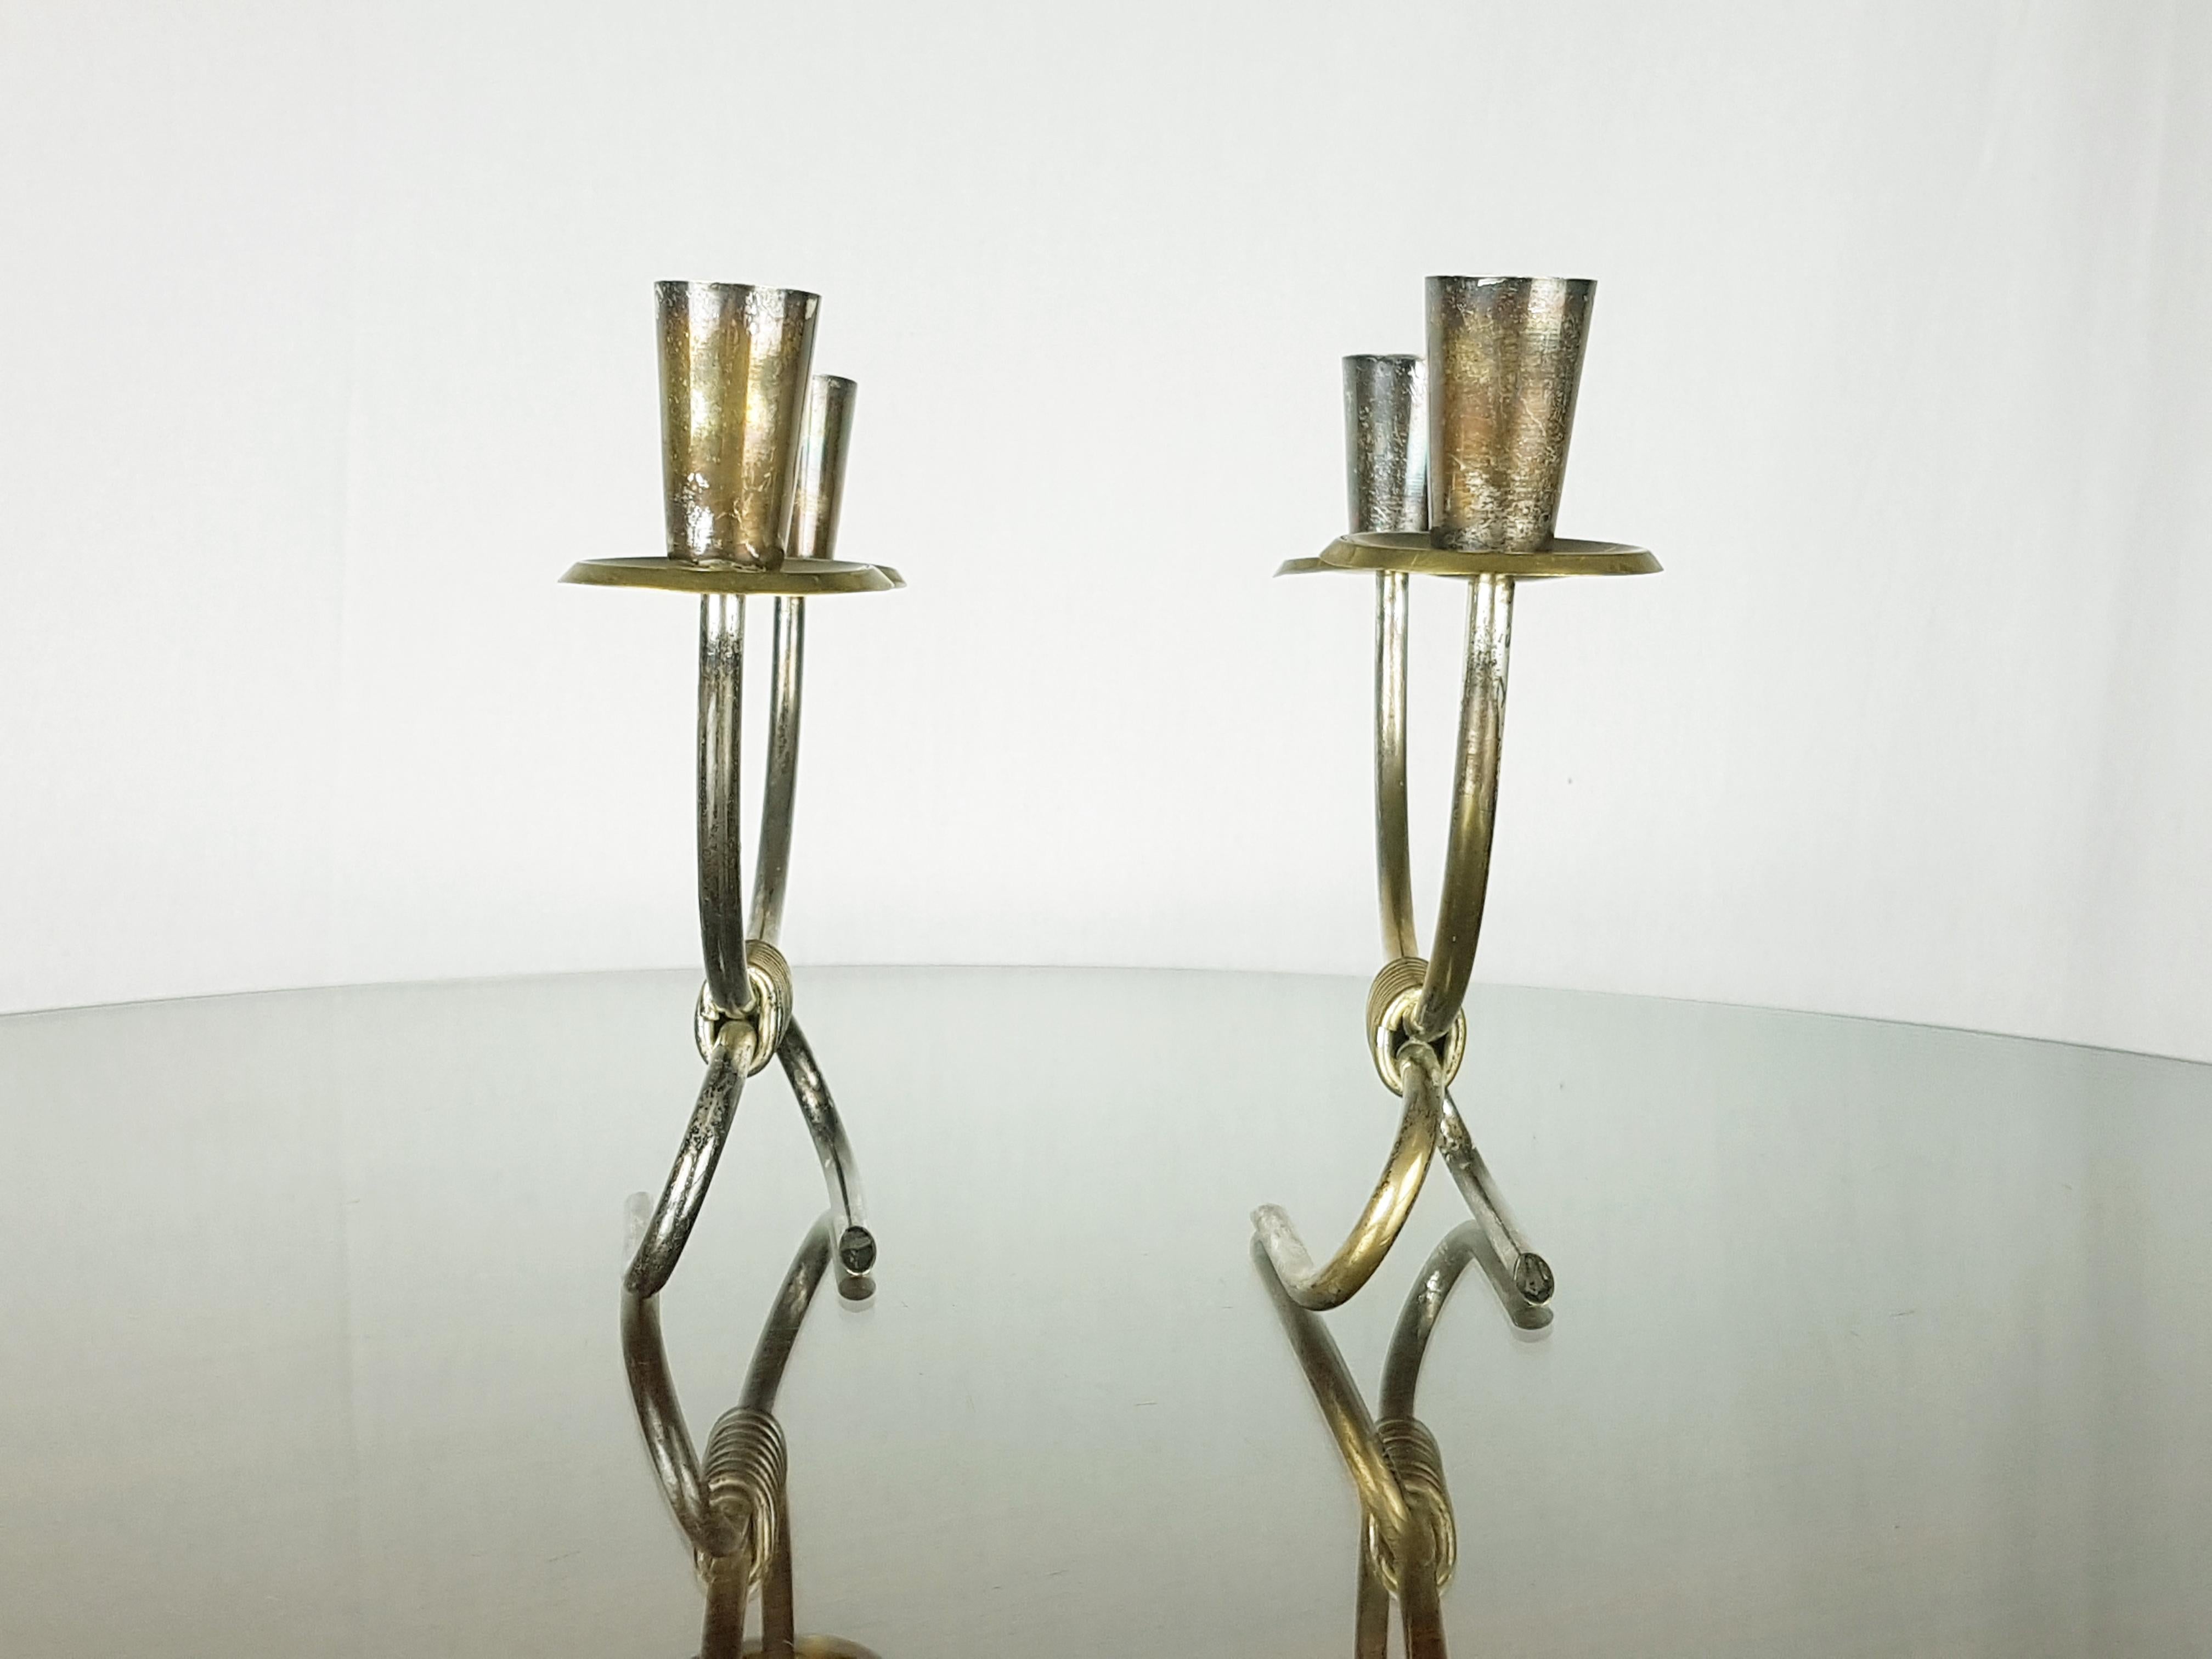 Silver Plated Brass Mid-Century Modern Candleholders by Aldo Tura for Macabo 1